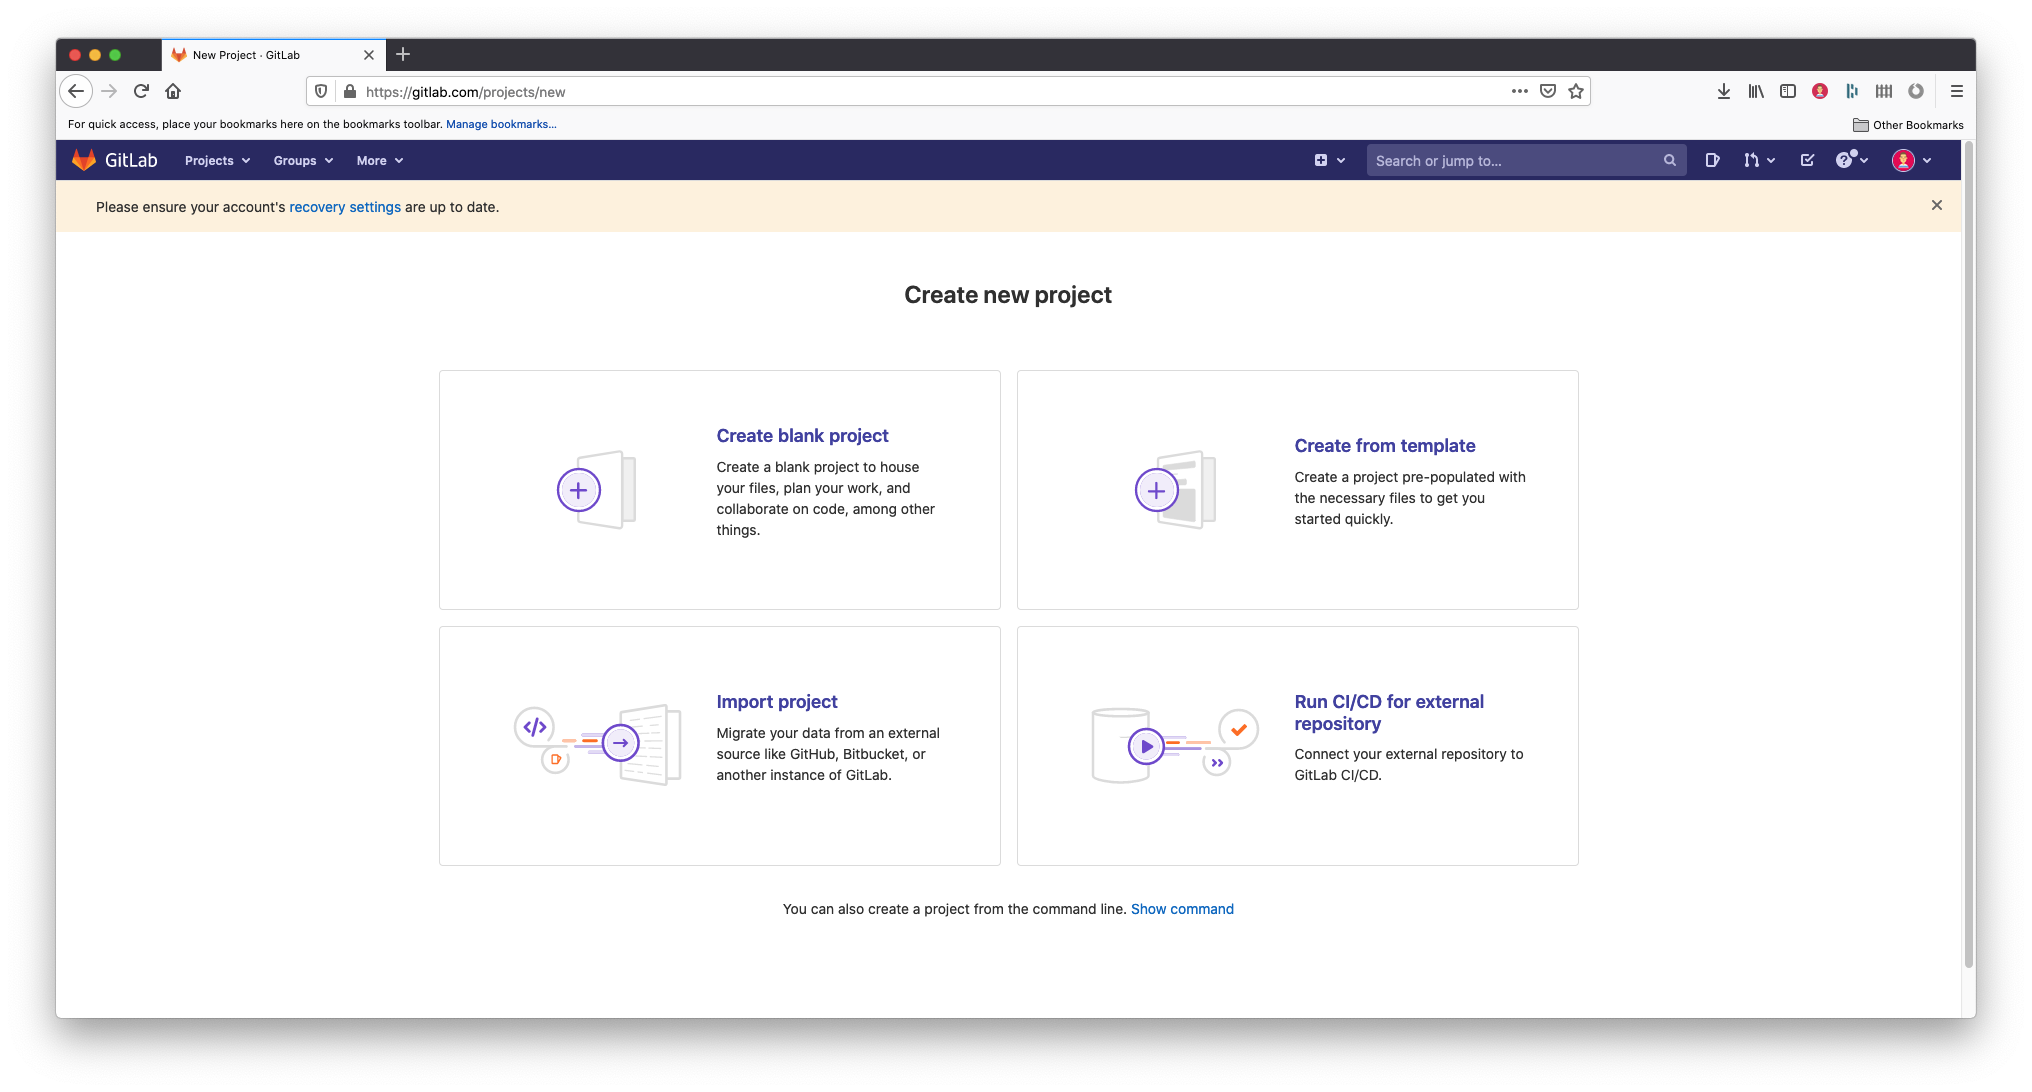 A screenshot of the Gitlab 'Create new project' screen. The screen contains 4 options: Create blank project, Create from template, Import Project and Run CI/CD for external repository. You will want to select the first option, Create blank project.